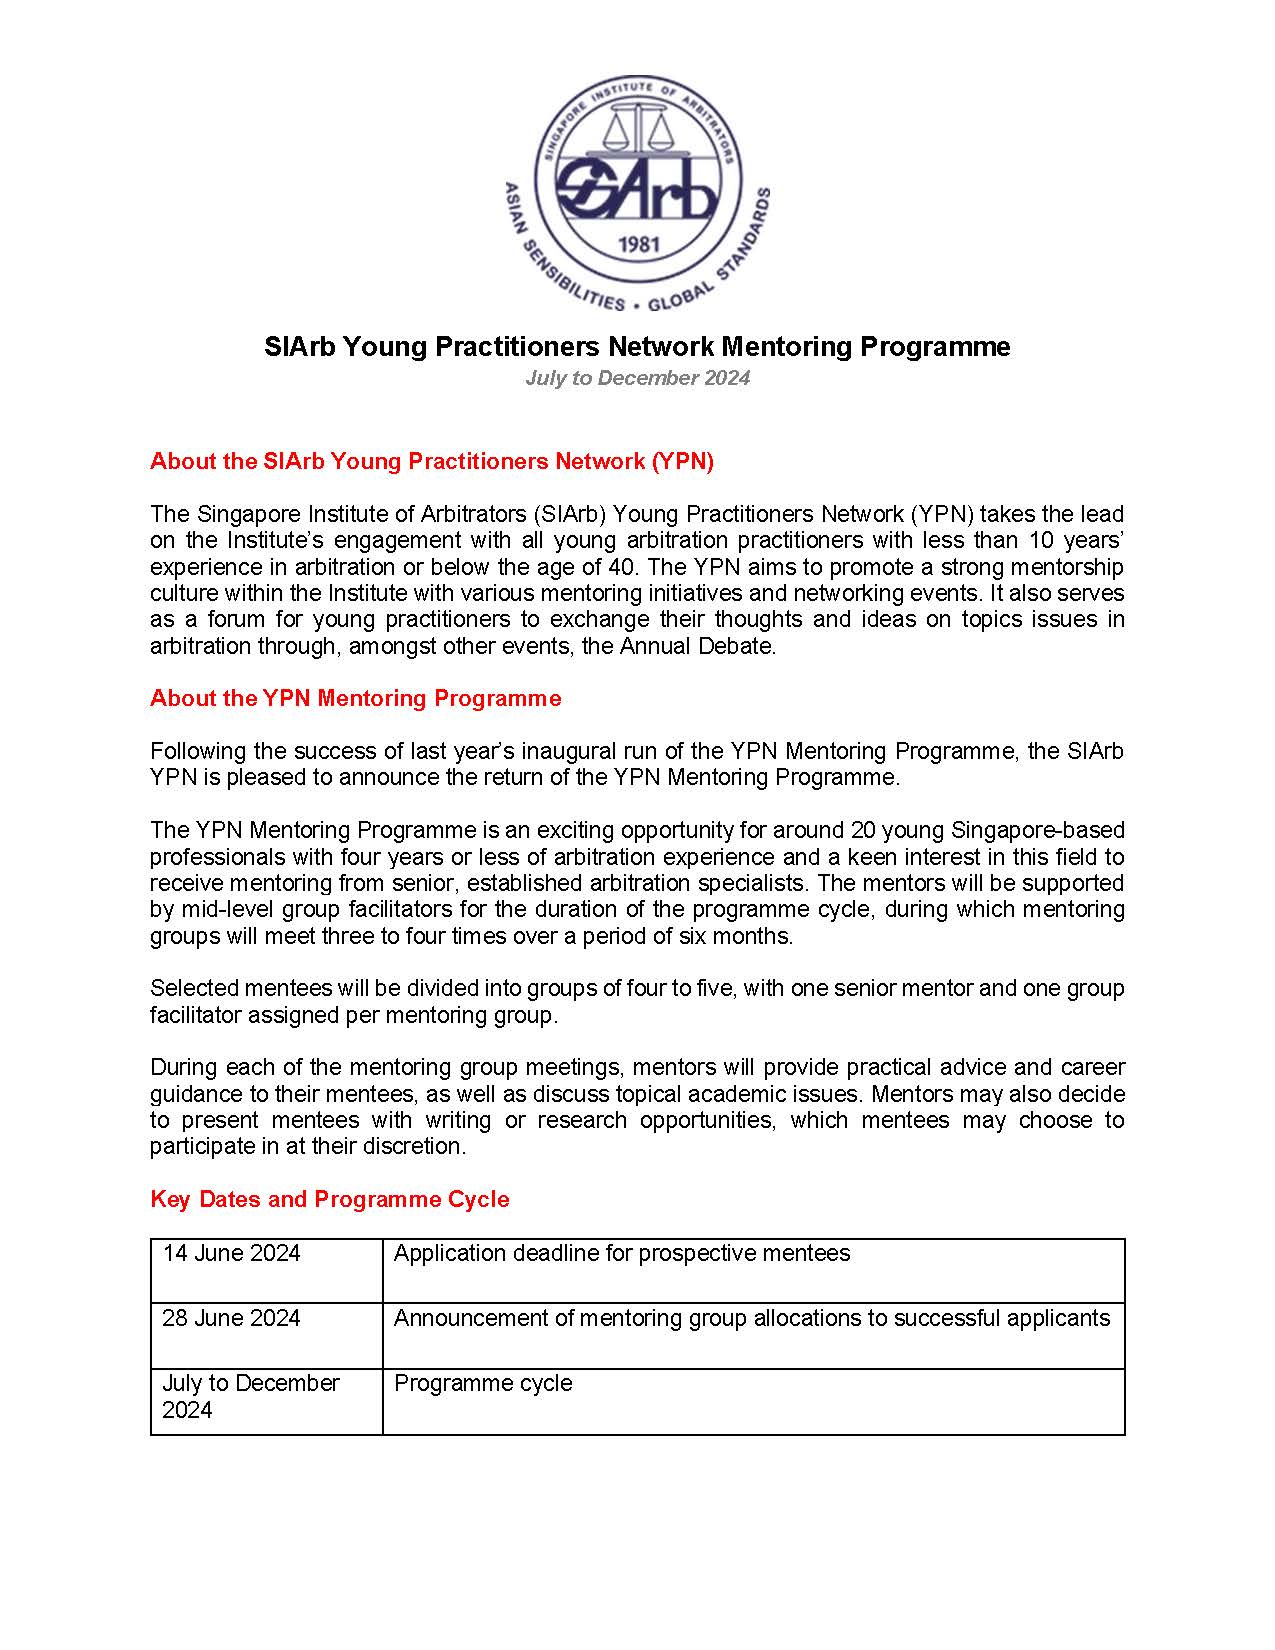 SIArb Young Practitioners Network Mentoring 2024 Brochure Page 1